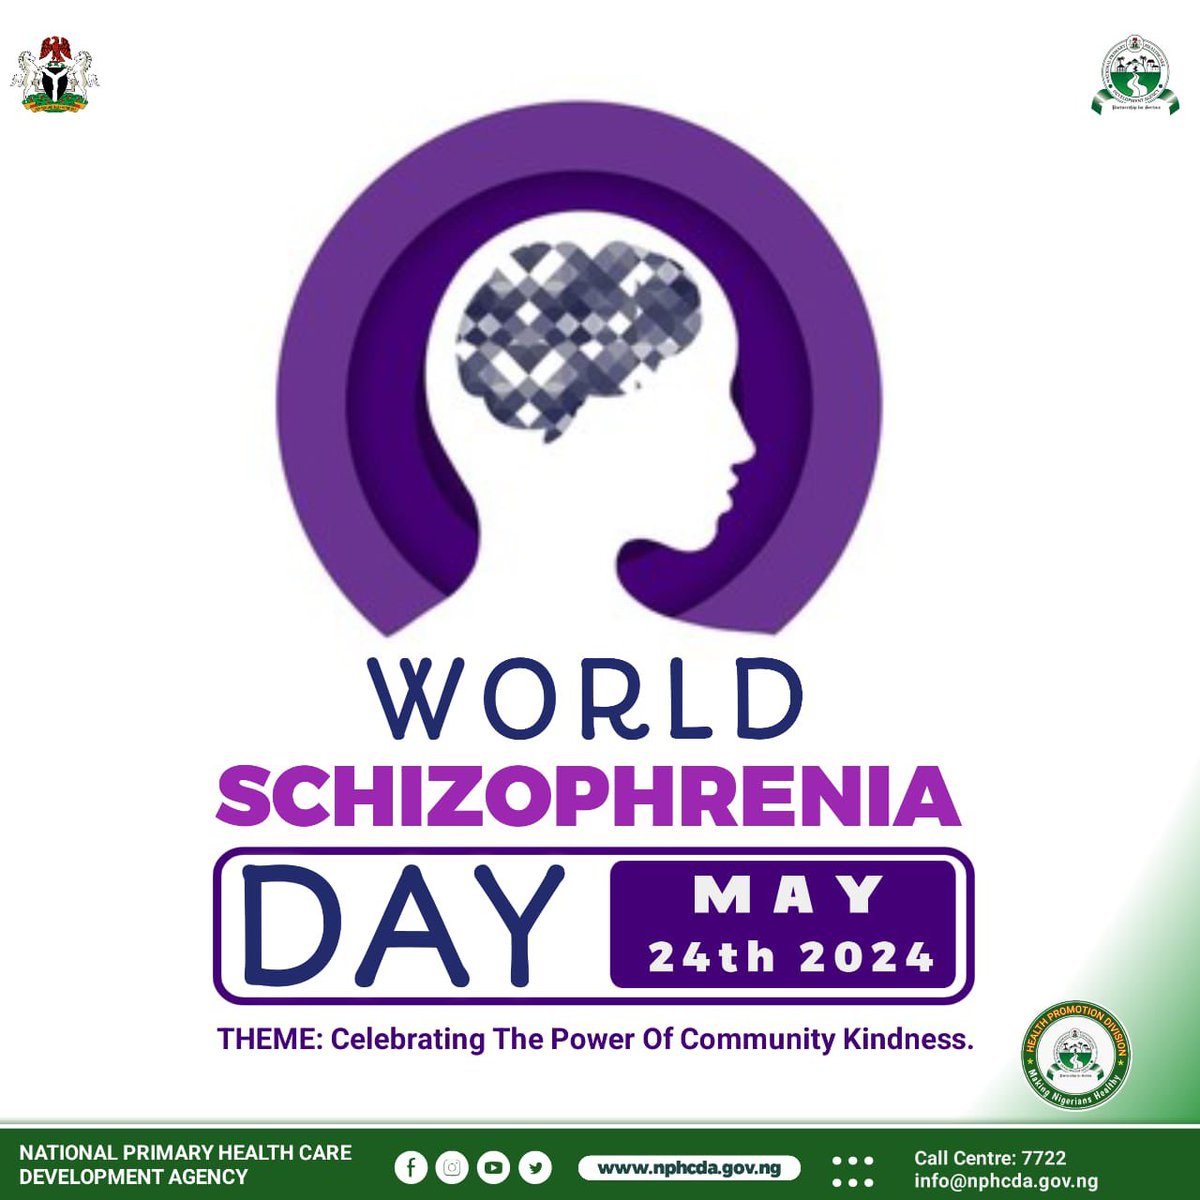 On World Schizophrenia Day 2024, let's shine a light on schizophrenia awareness. It's time to break down stigmas, support those affected, and advocate for inclusive mental health care. Remember, mental health matters, and every mind deserves compassion and understanding.